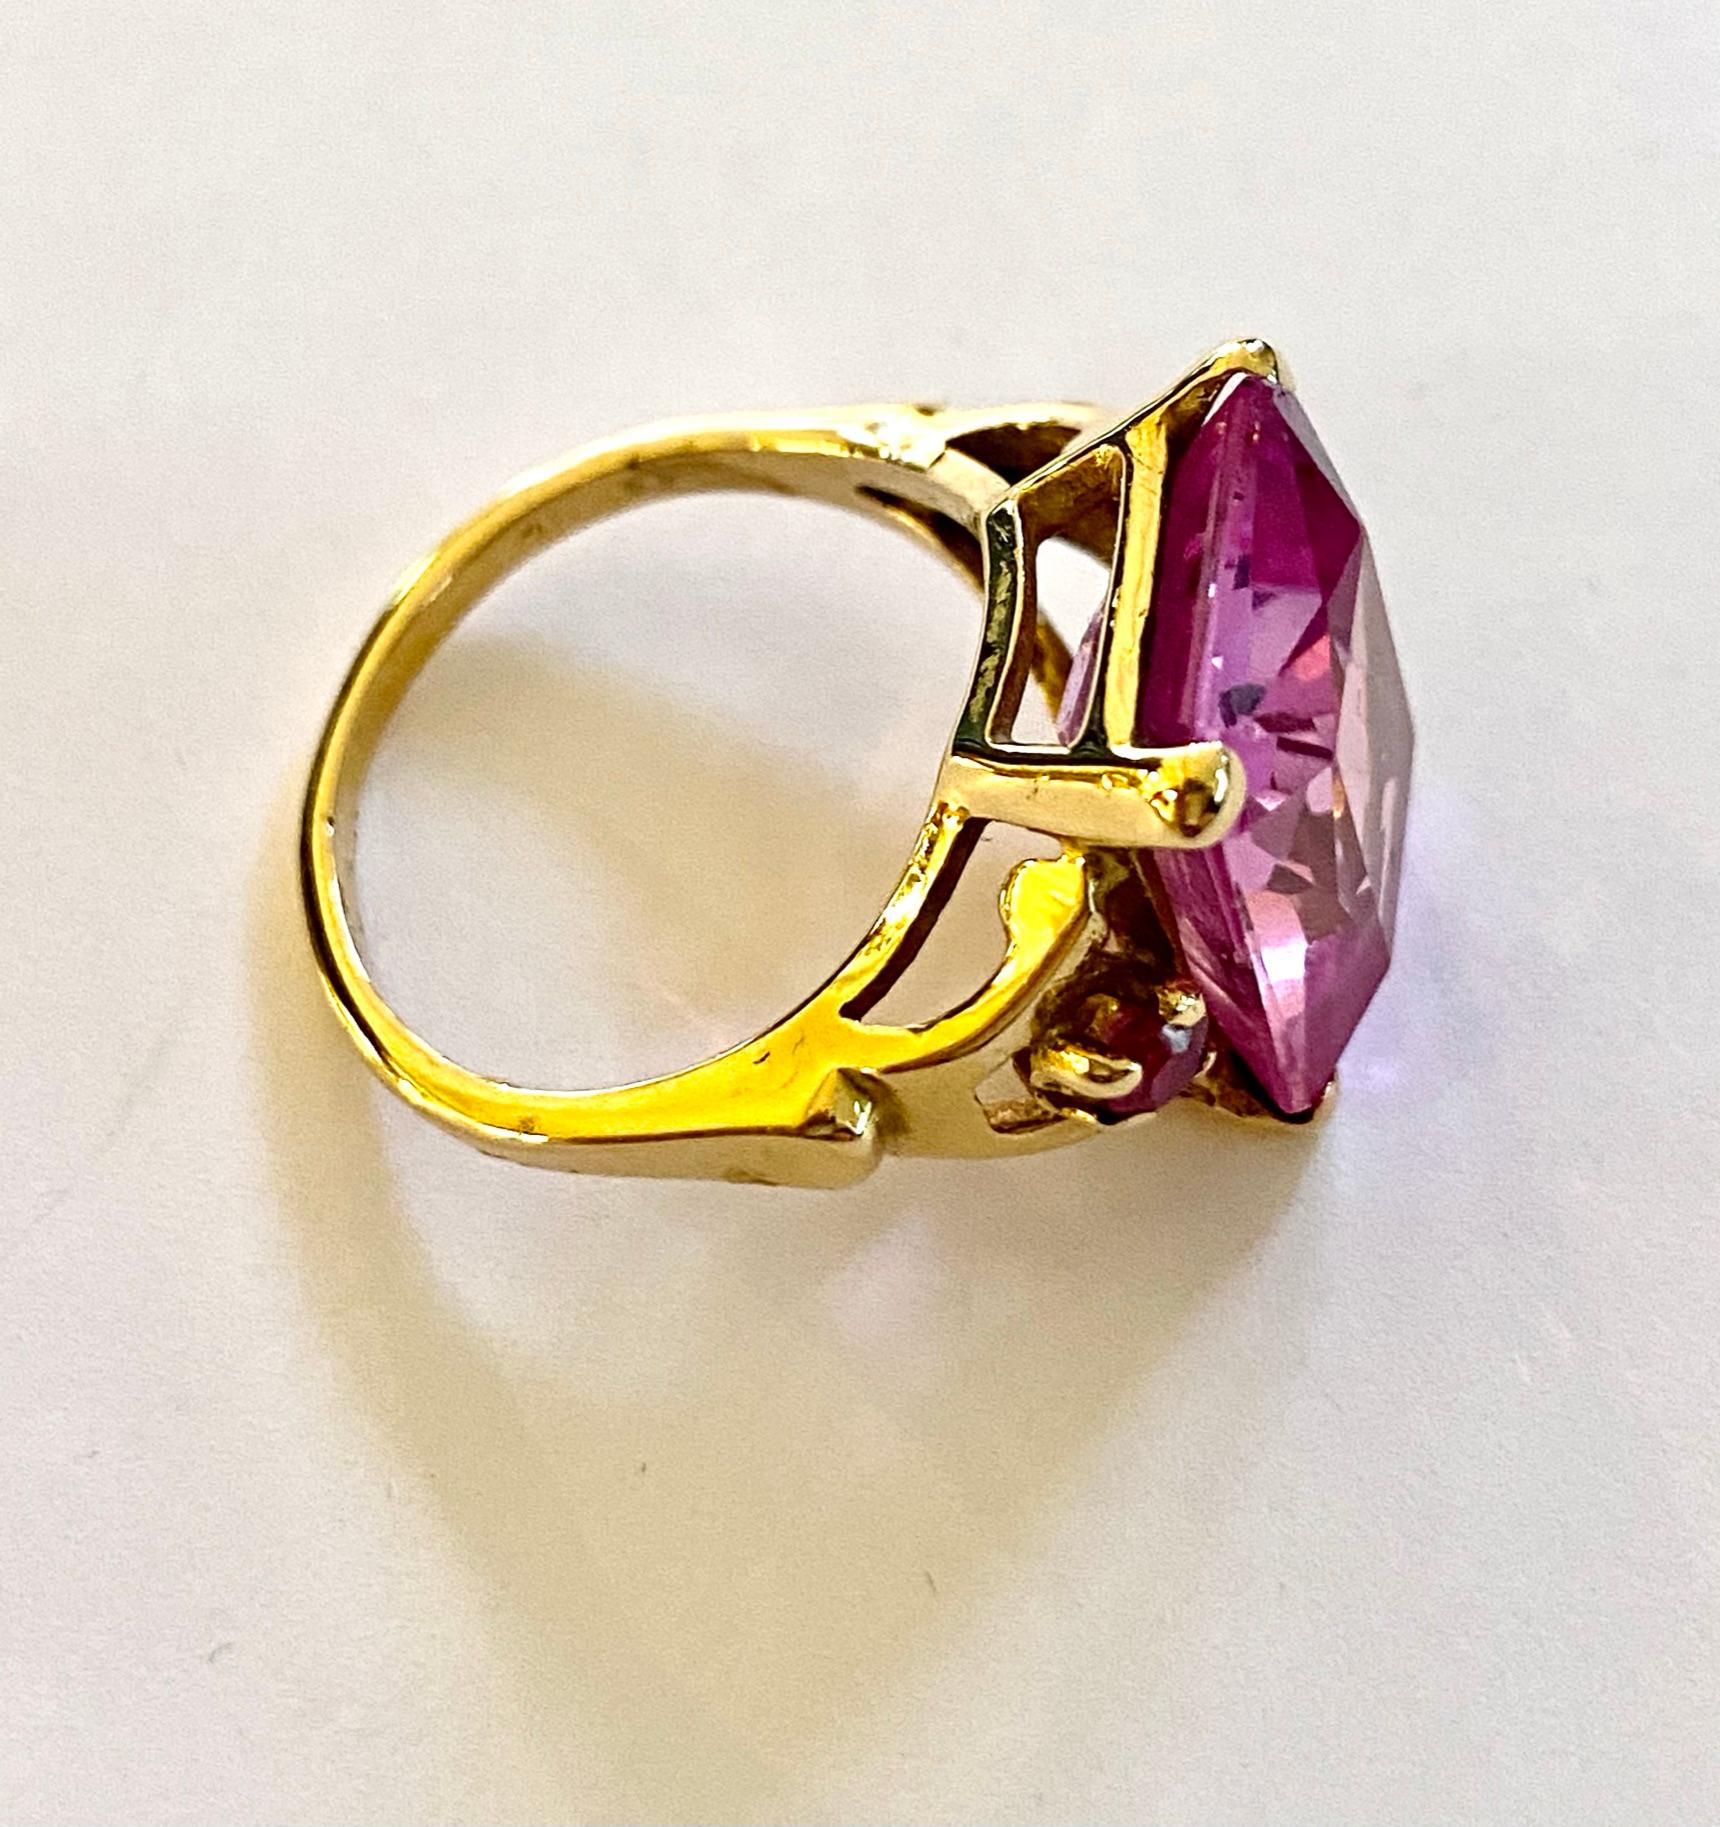 Radiant Cut 14 Karat Yellow Gold Ring, Set with Synthetic Pink Sapphire and 2 Synthetic Ruby